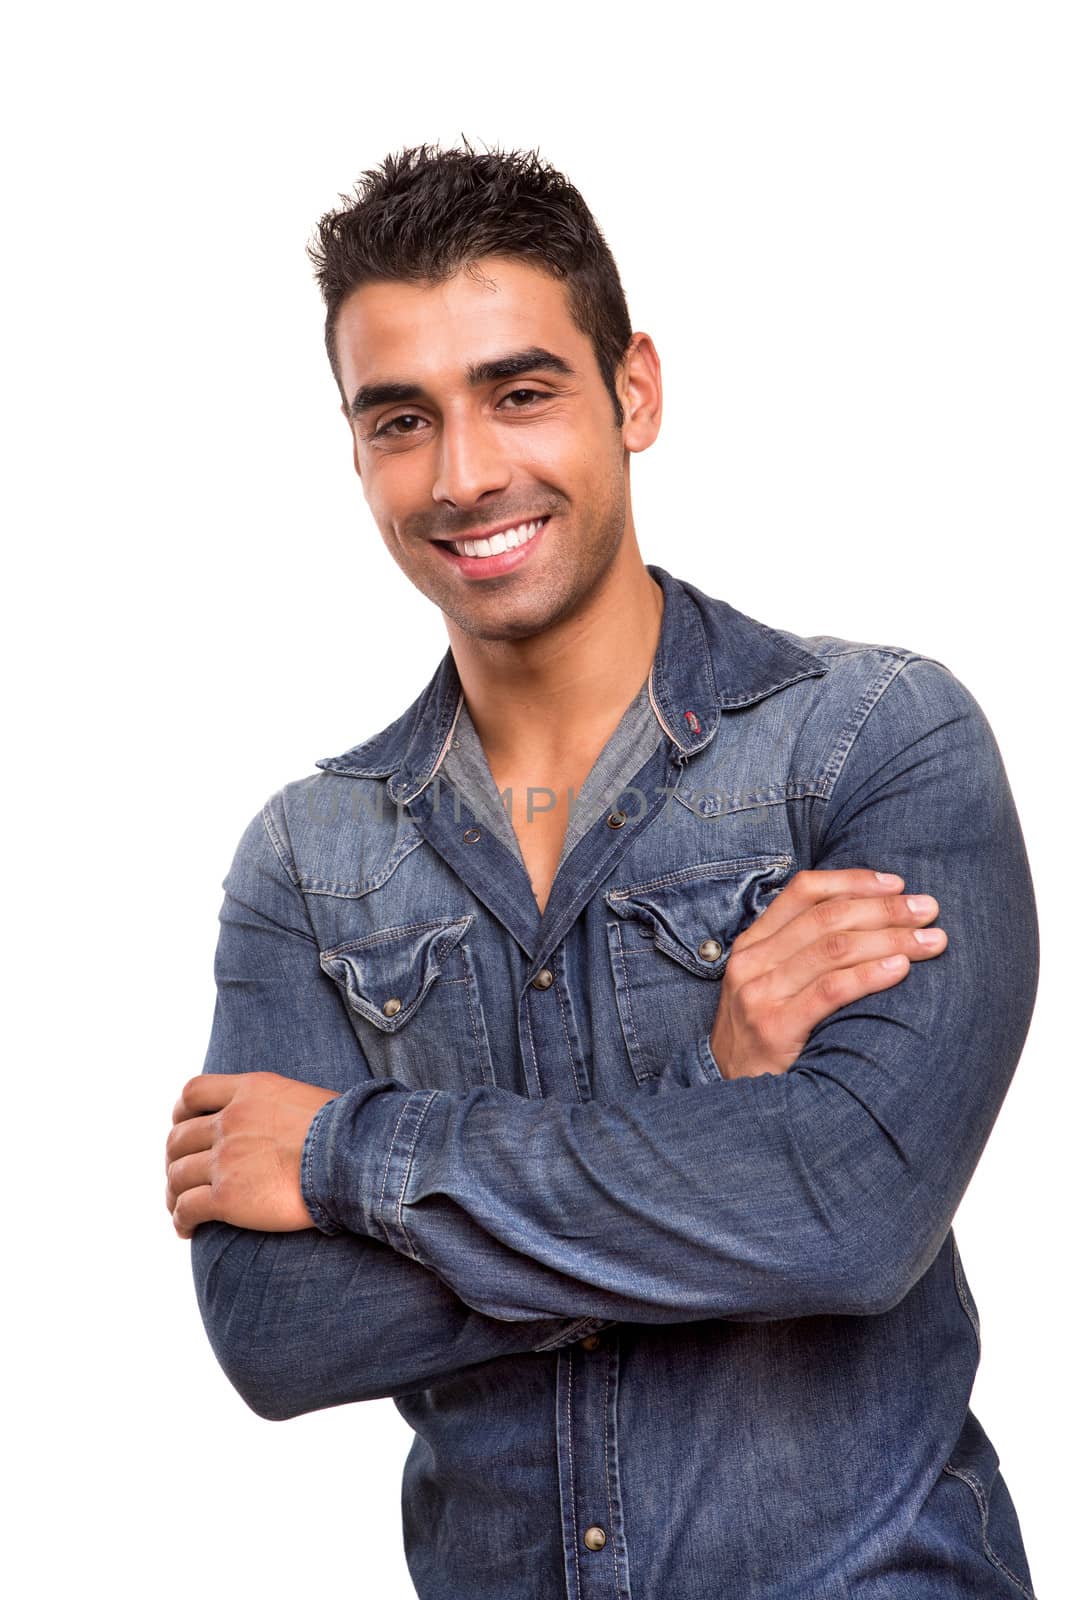 Casual young man with arms crossed and smiling